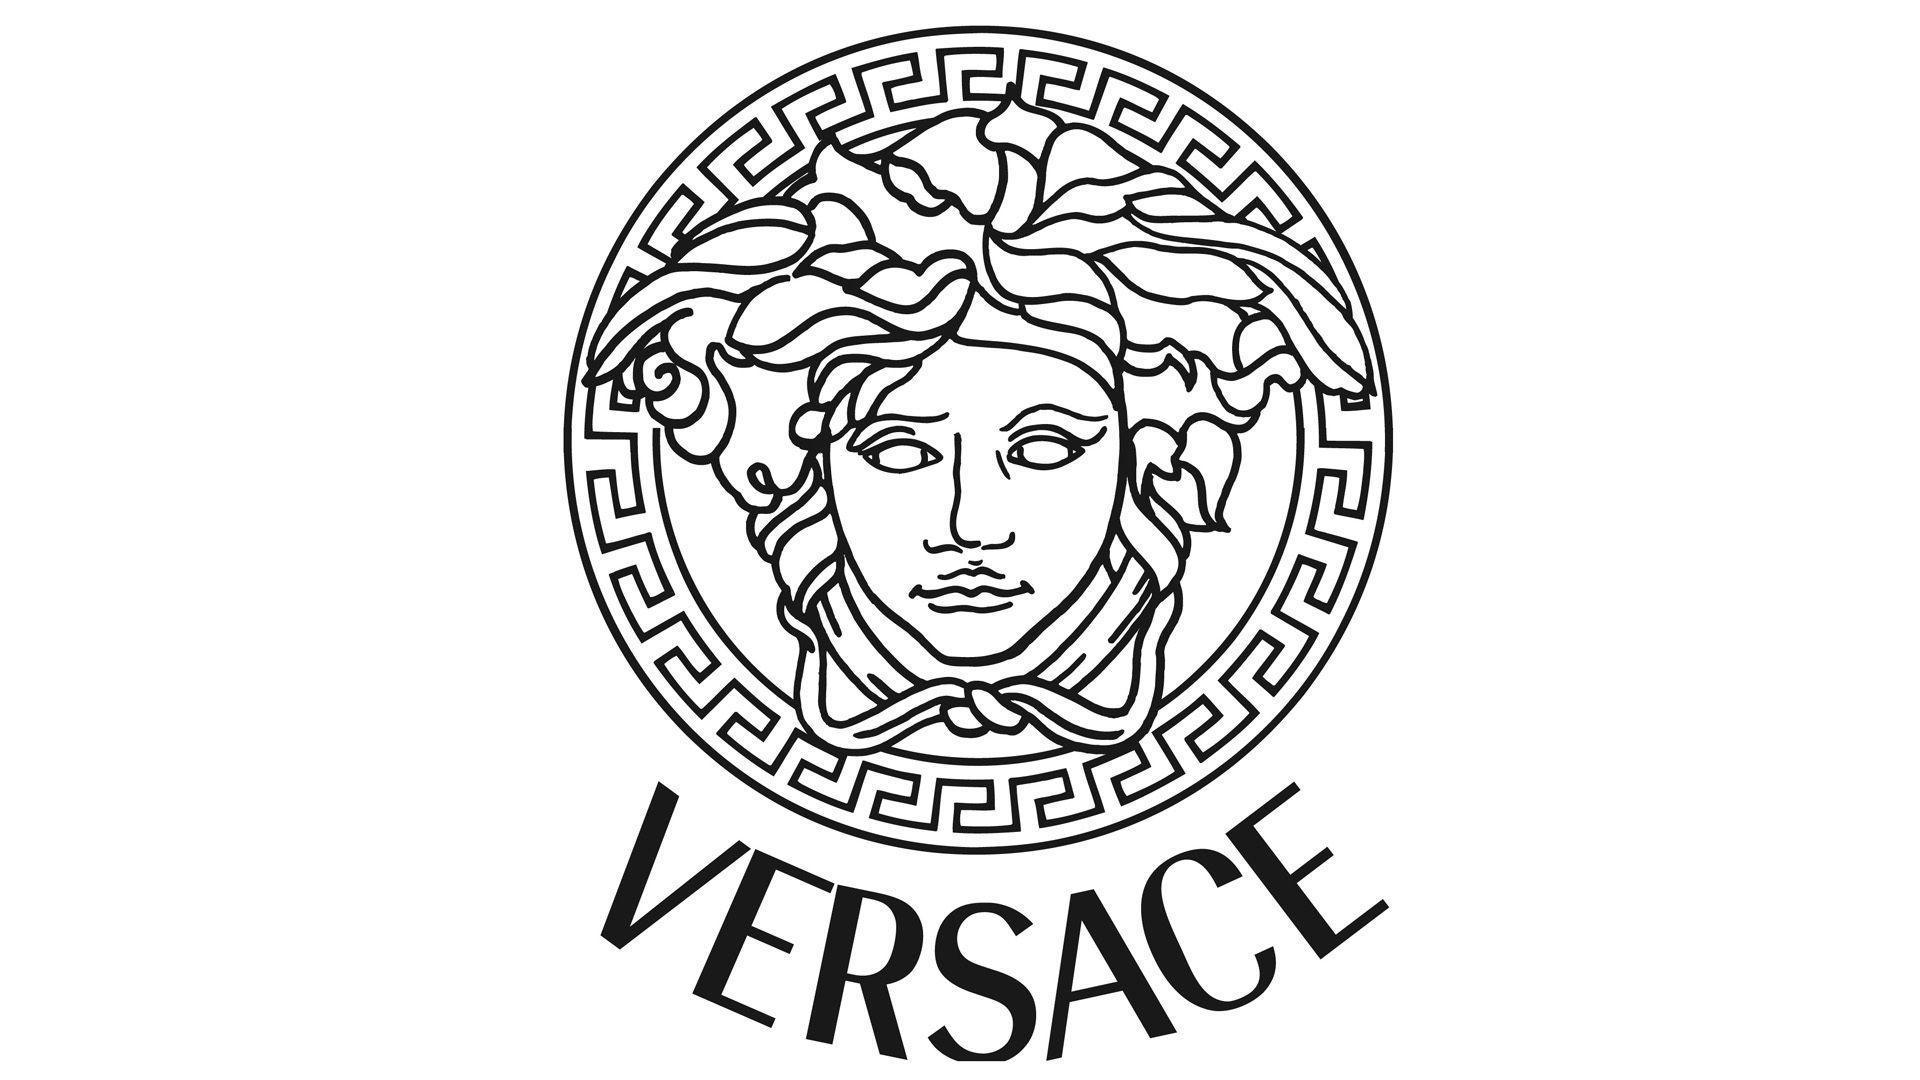 Versace Wallpaper Image Photo Picture Background